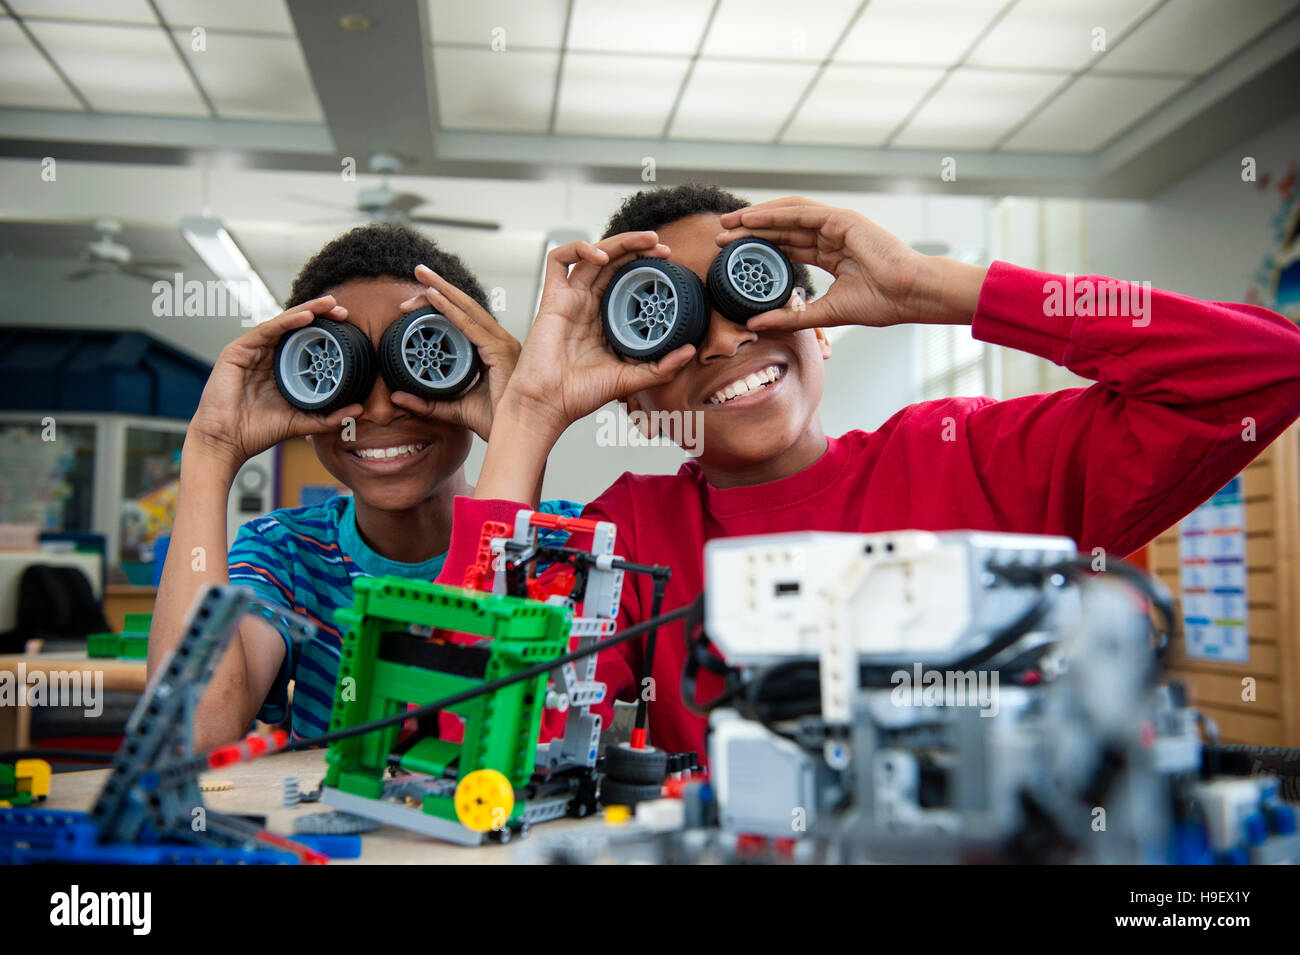 Boys playing with toy wheels in library Stock Photo